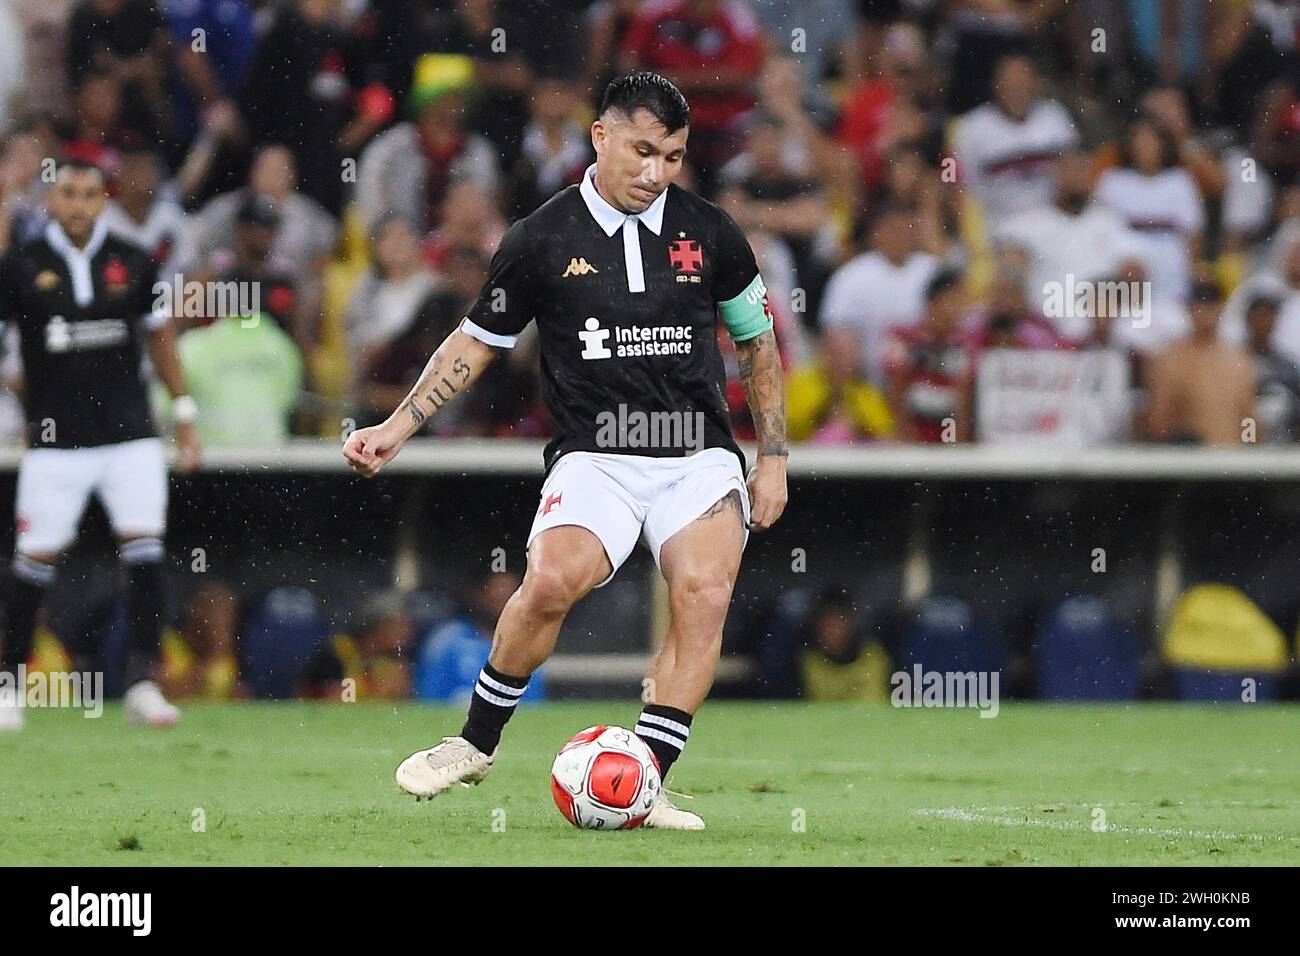 Rio de Janeiro, Brazil, February 4, 2024. Soccer player Gary Medel of the Vasco team during a match against Flamengo, for the Carioca Championship, at Stock Photo